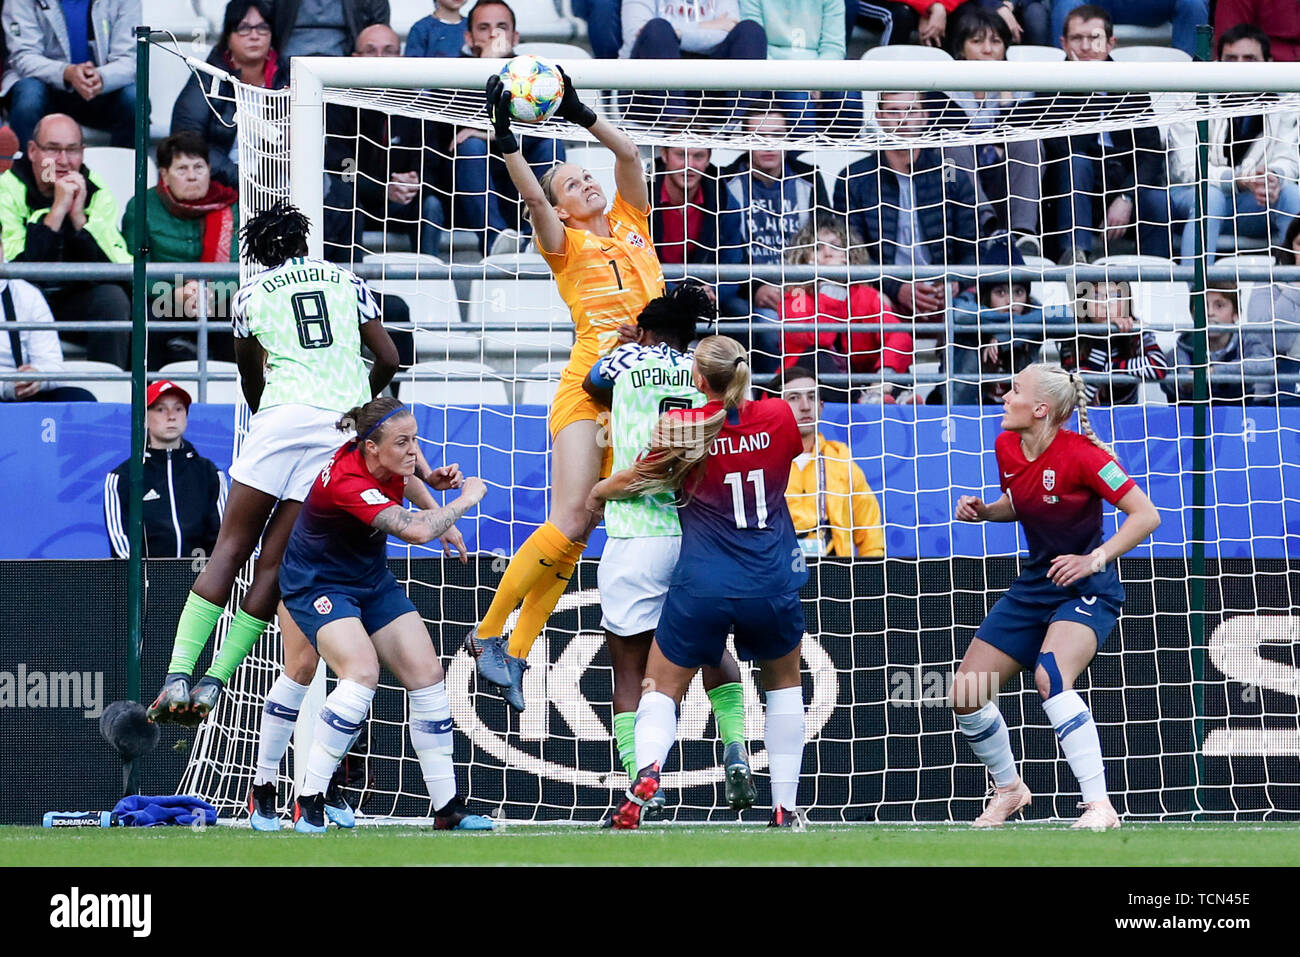 Reims, France. 8th June, 2019. Goalkeeper Ingrid Hjelmseth (Top) of Norway reaches to save the goal during a Group A match between Norway and Nigeria at the 2019 FIFA Women's World Cup in Reims, France, June 8, 2019. Credit: Zheng Huansong/Xinhua/Alamy Live News Stock Photo